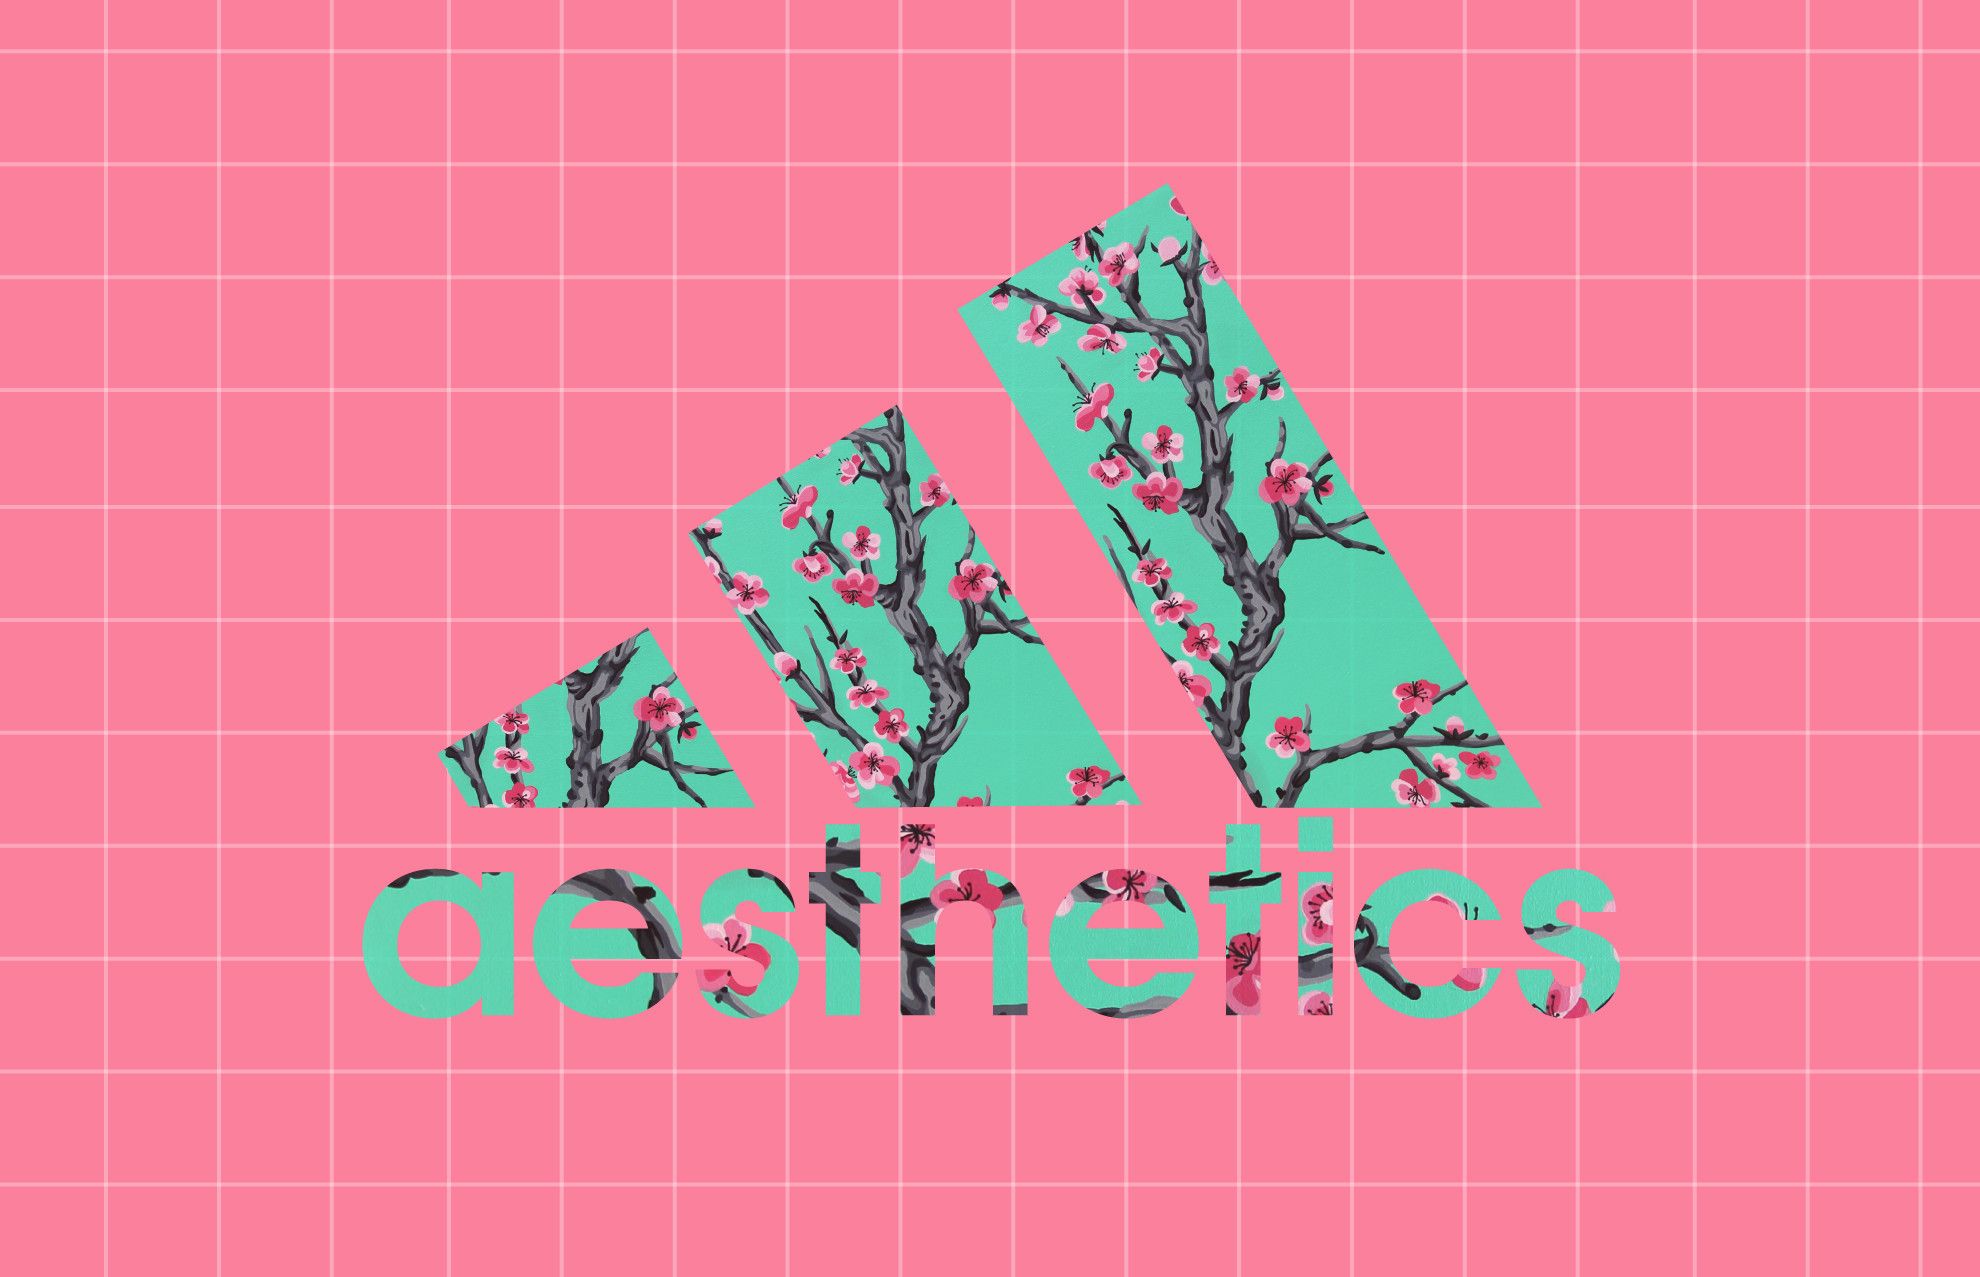 A pink and green aesthetic wallpaper of the Adidas logo - Adidas